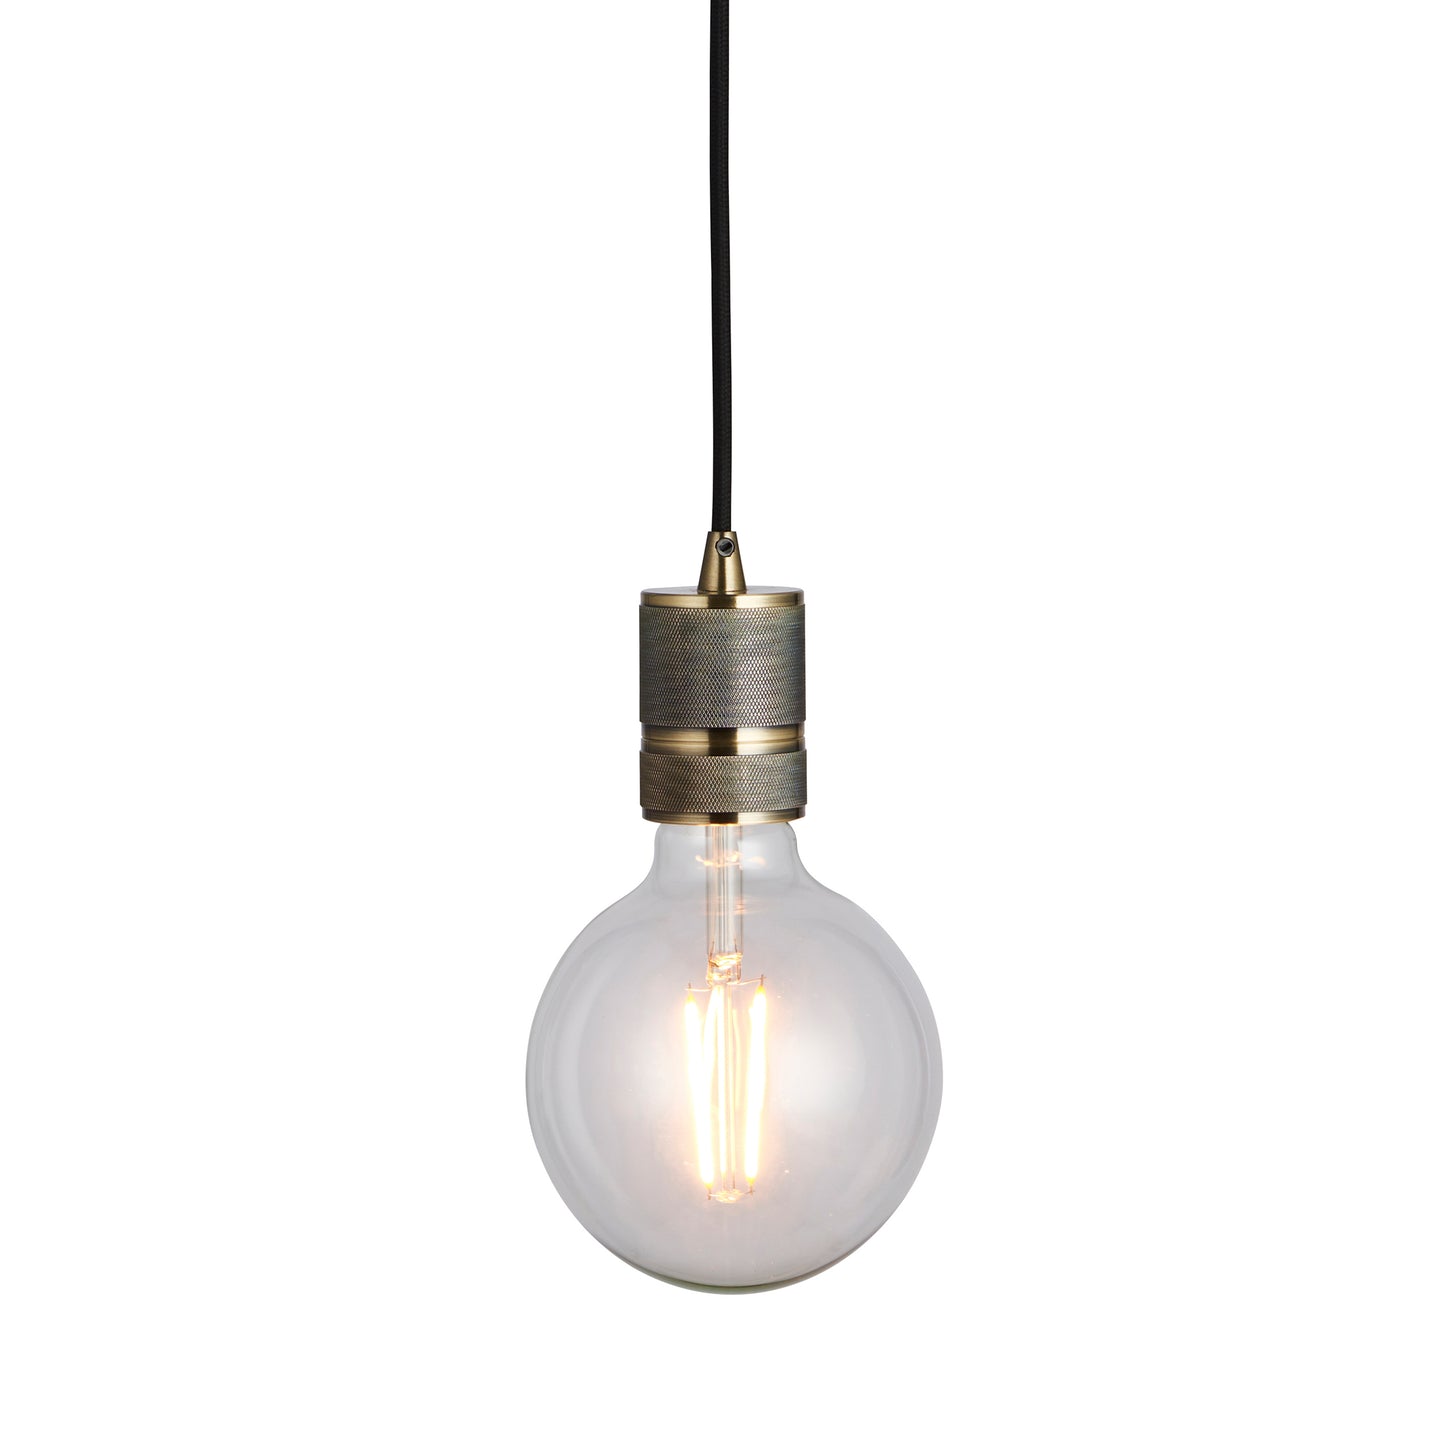 An Urban Pendant Light Antique Brass hanging from a chain on a white background from Kikiathome.co.uk, offering interior decor and home furniture.